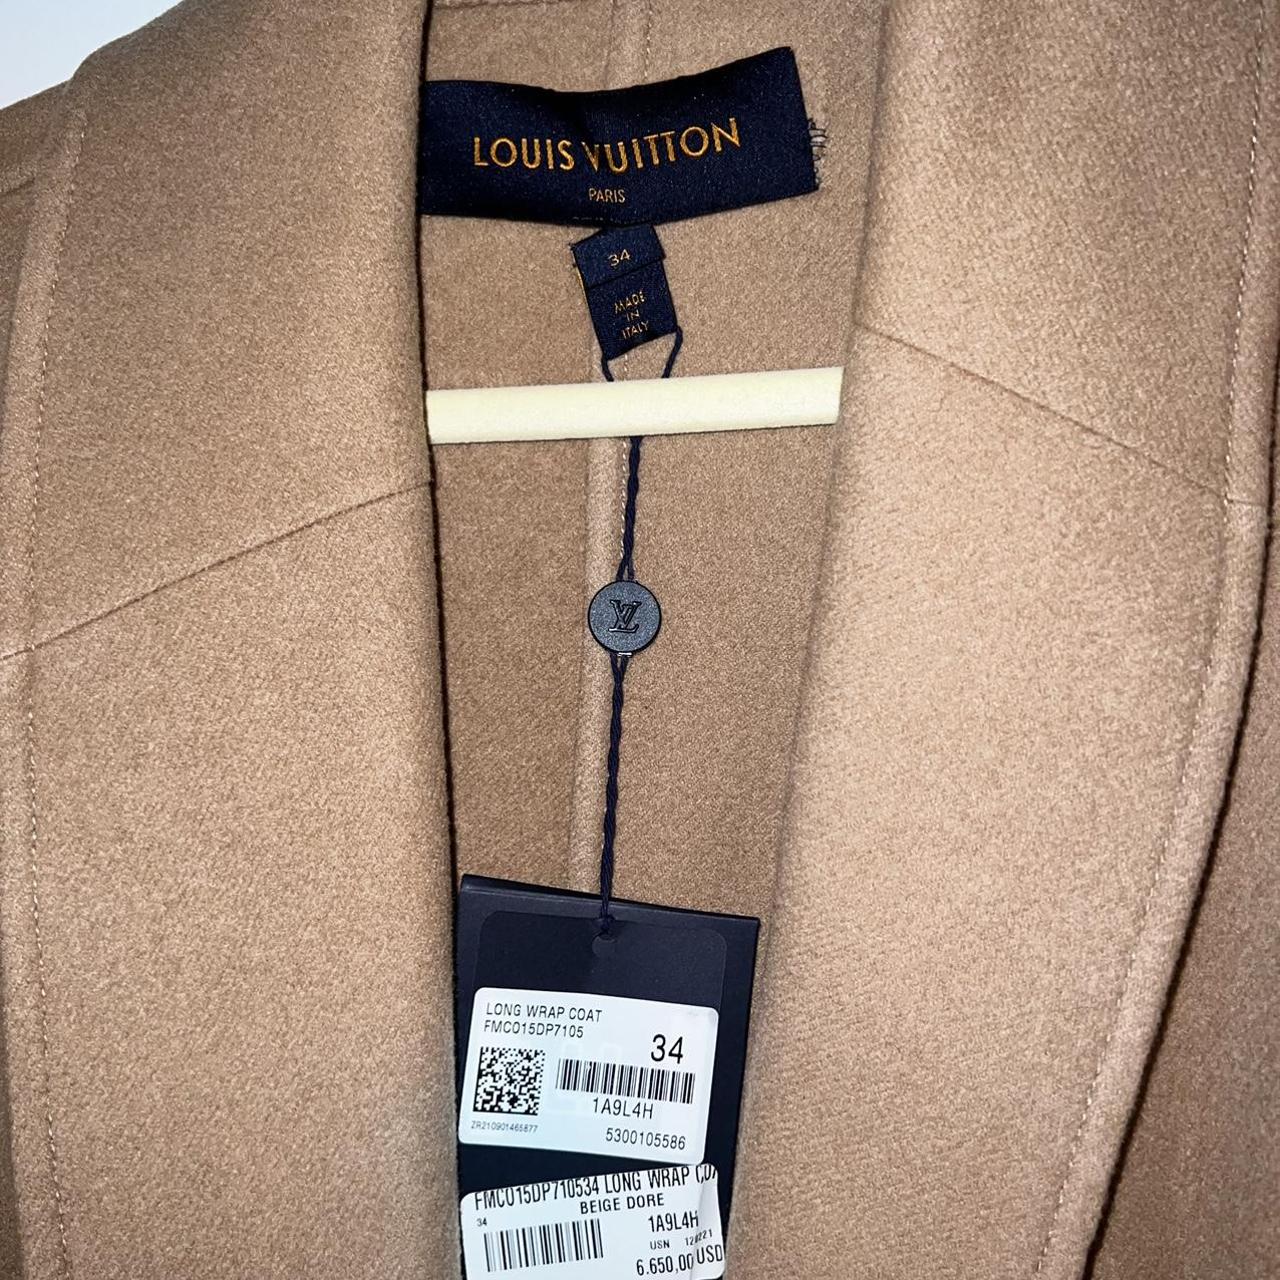 OUT OF STOCK AT LV! LOUIS VUITTON DOUBLE FACE ROBE - Depop